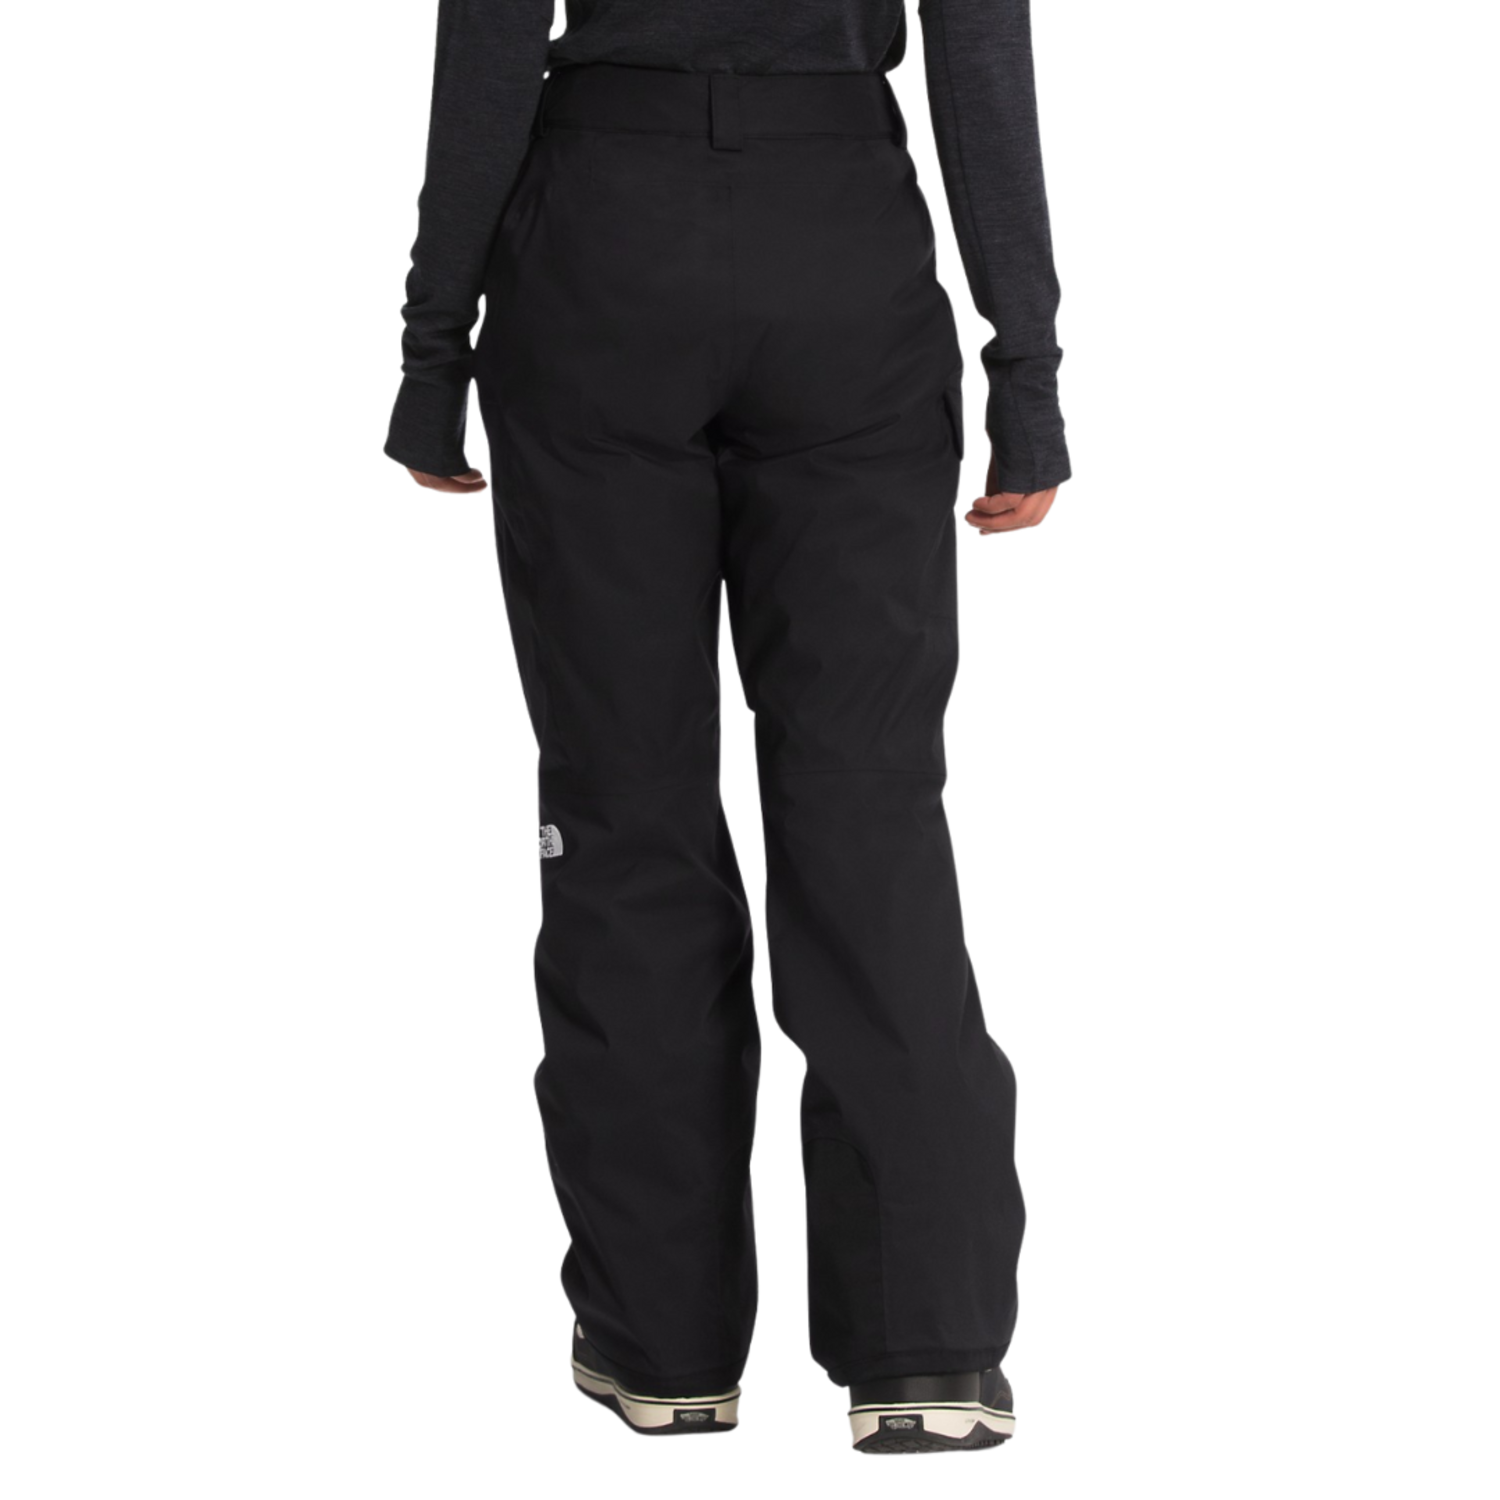 The North Face Hyvent Women's Ski Pants Black Size Small Snowboard